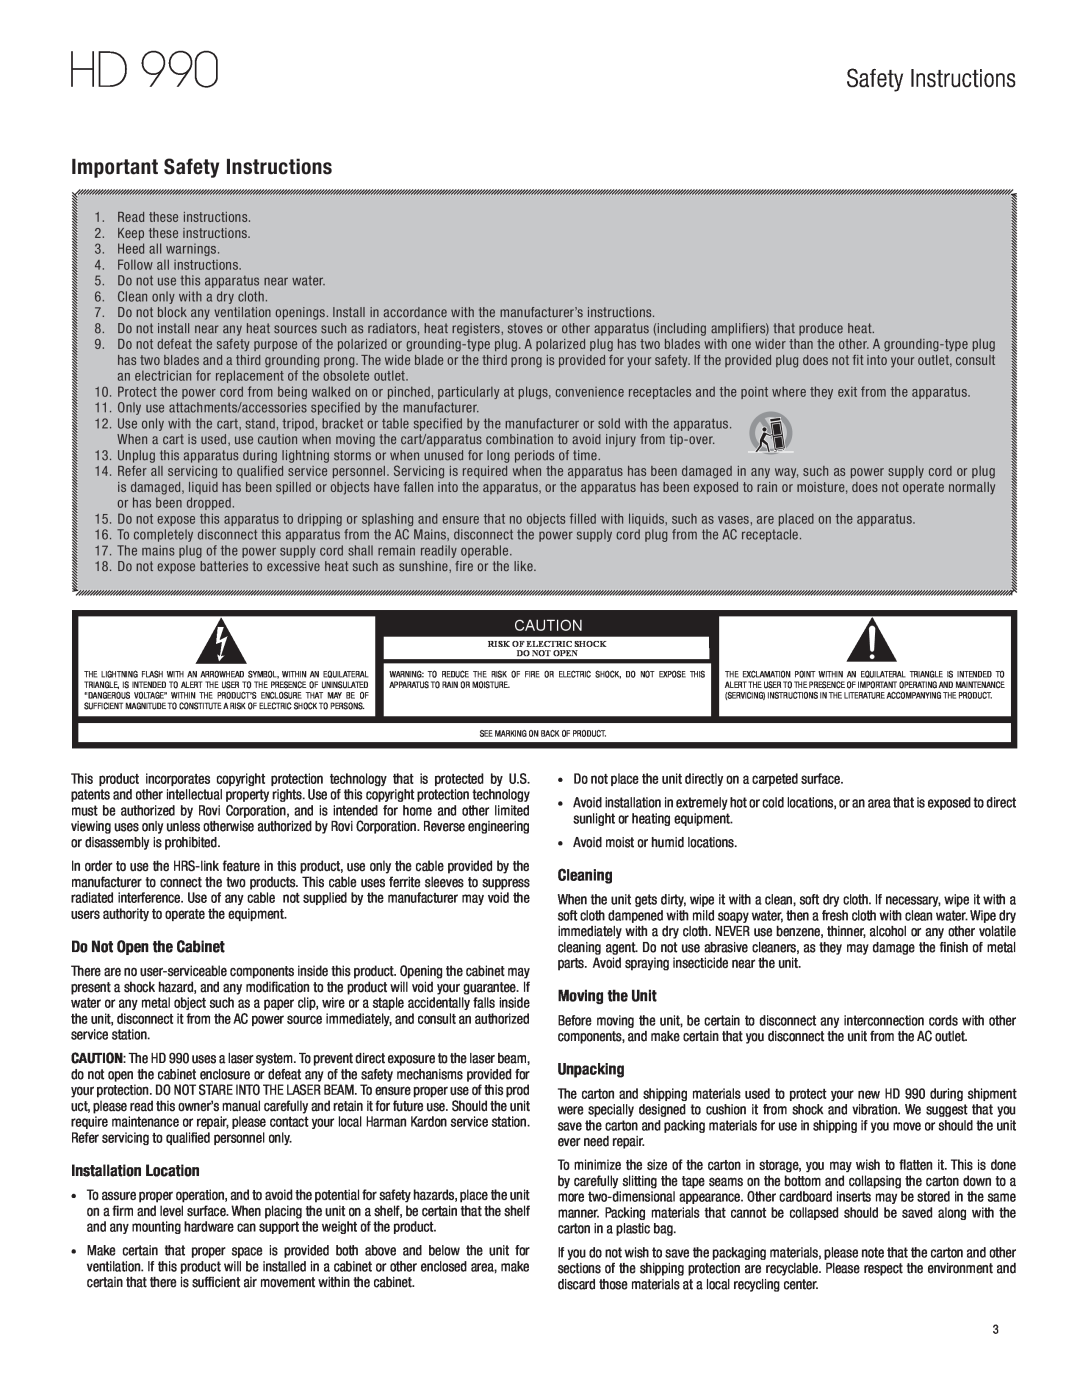 Harman-Kardon HD 990 Important Safety Instructions, Do Not Open the Cabinet, Installation Location, Cleaning 